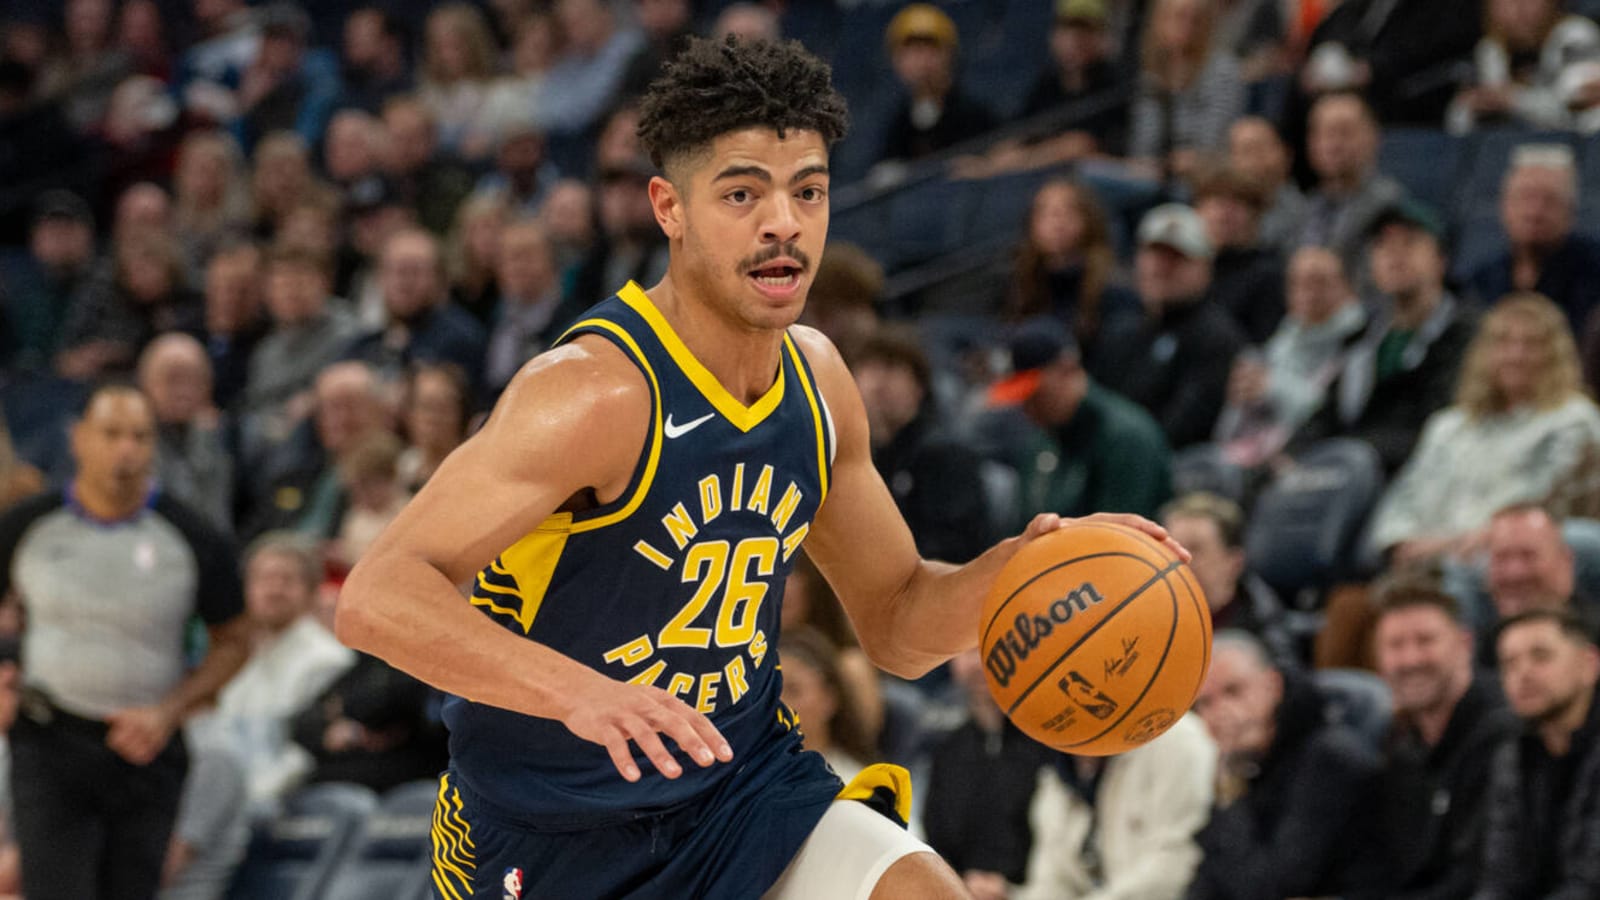 Ben Sheppard earning trust of Indiana Pacers with his hard play and quality performances